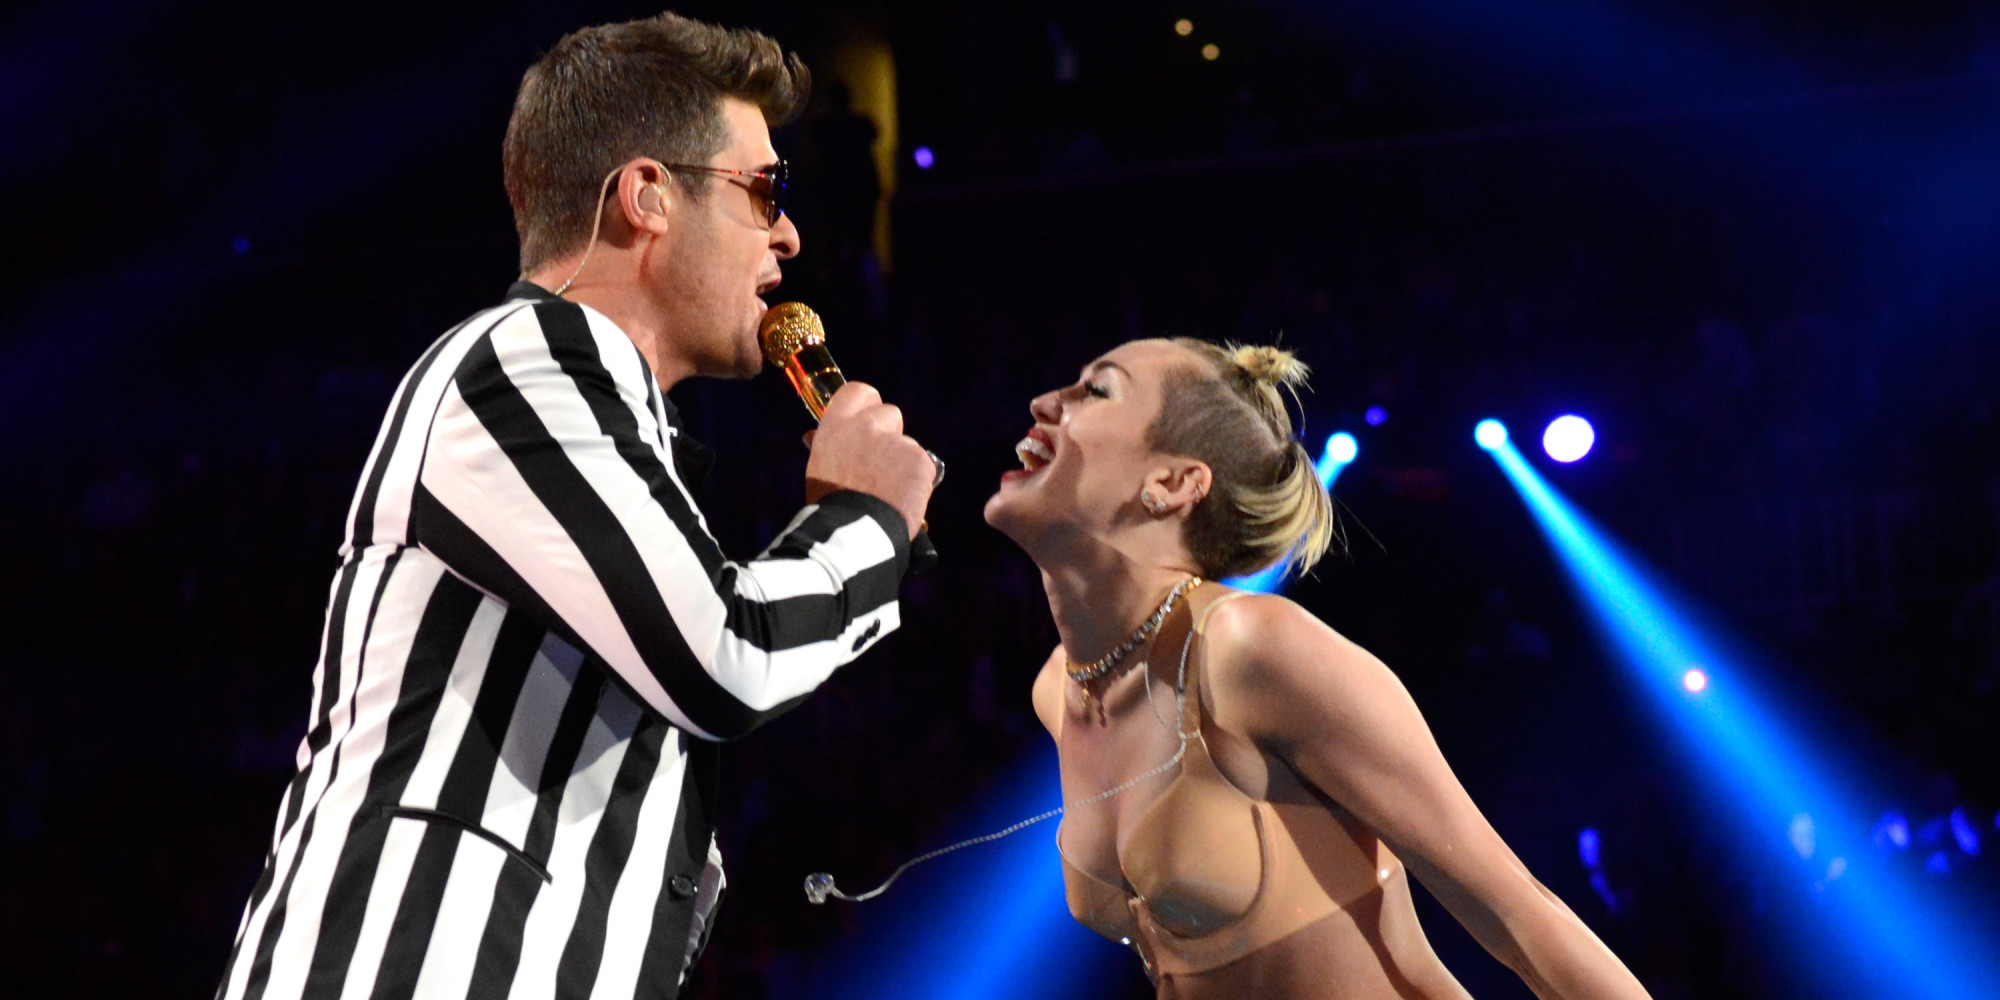 Robin Thicke 'Definitely' Won't Perform With Miley Cyrus Again | HuffPost